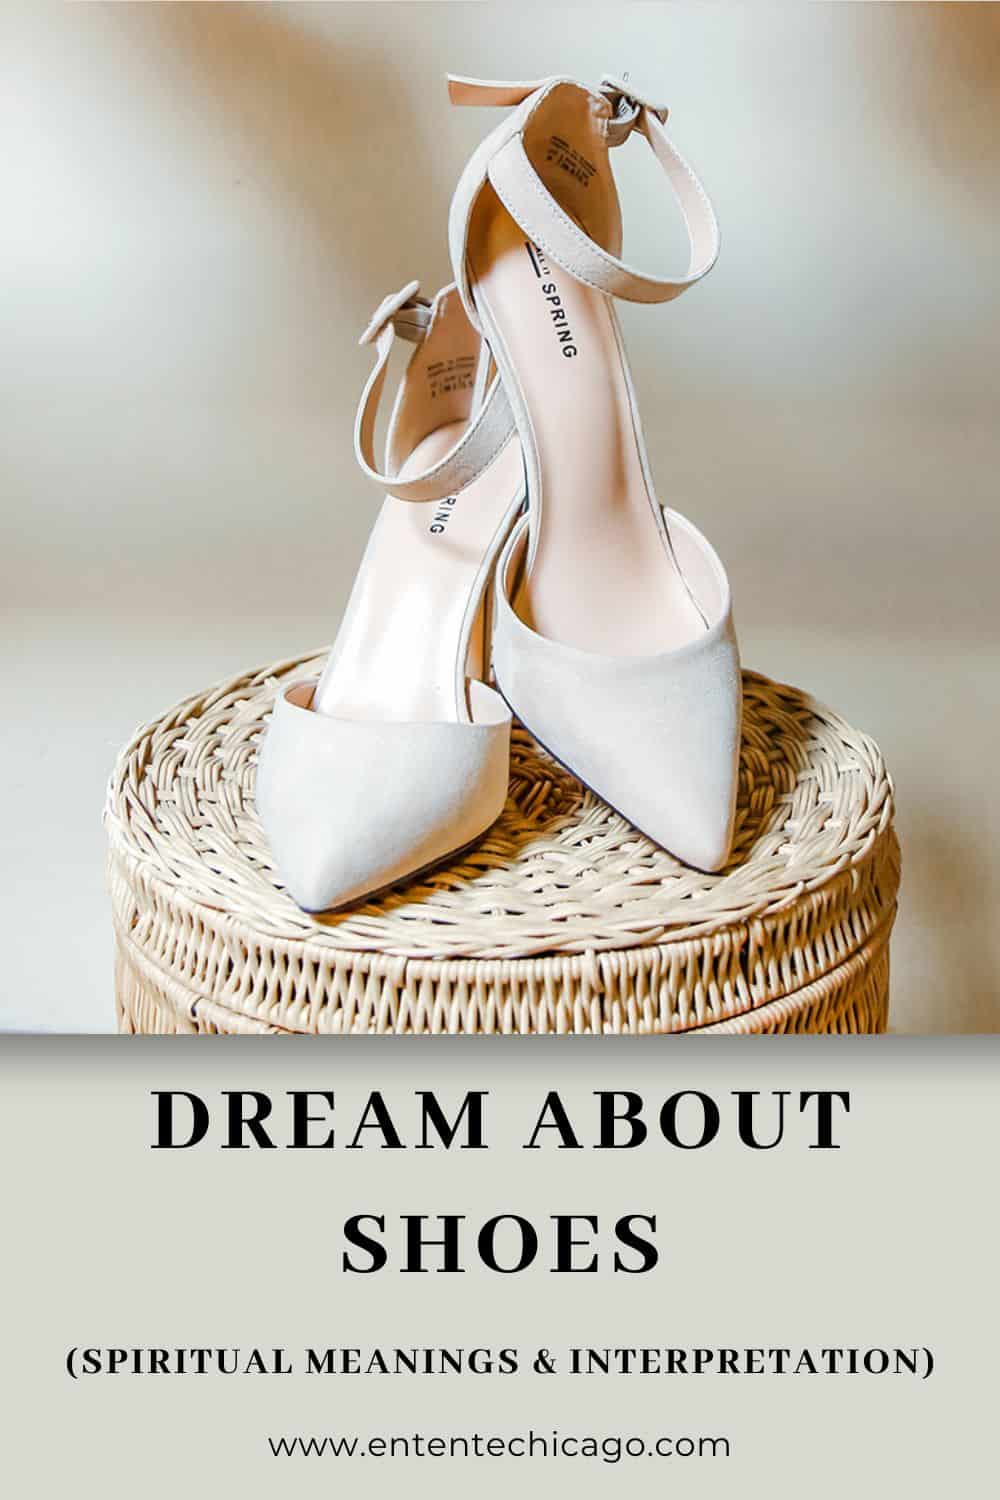 Dream About Shoes (Spiritual Meanings & Interpretation)